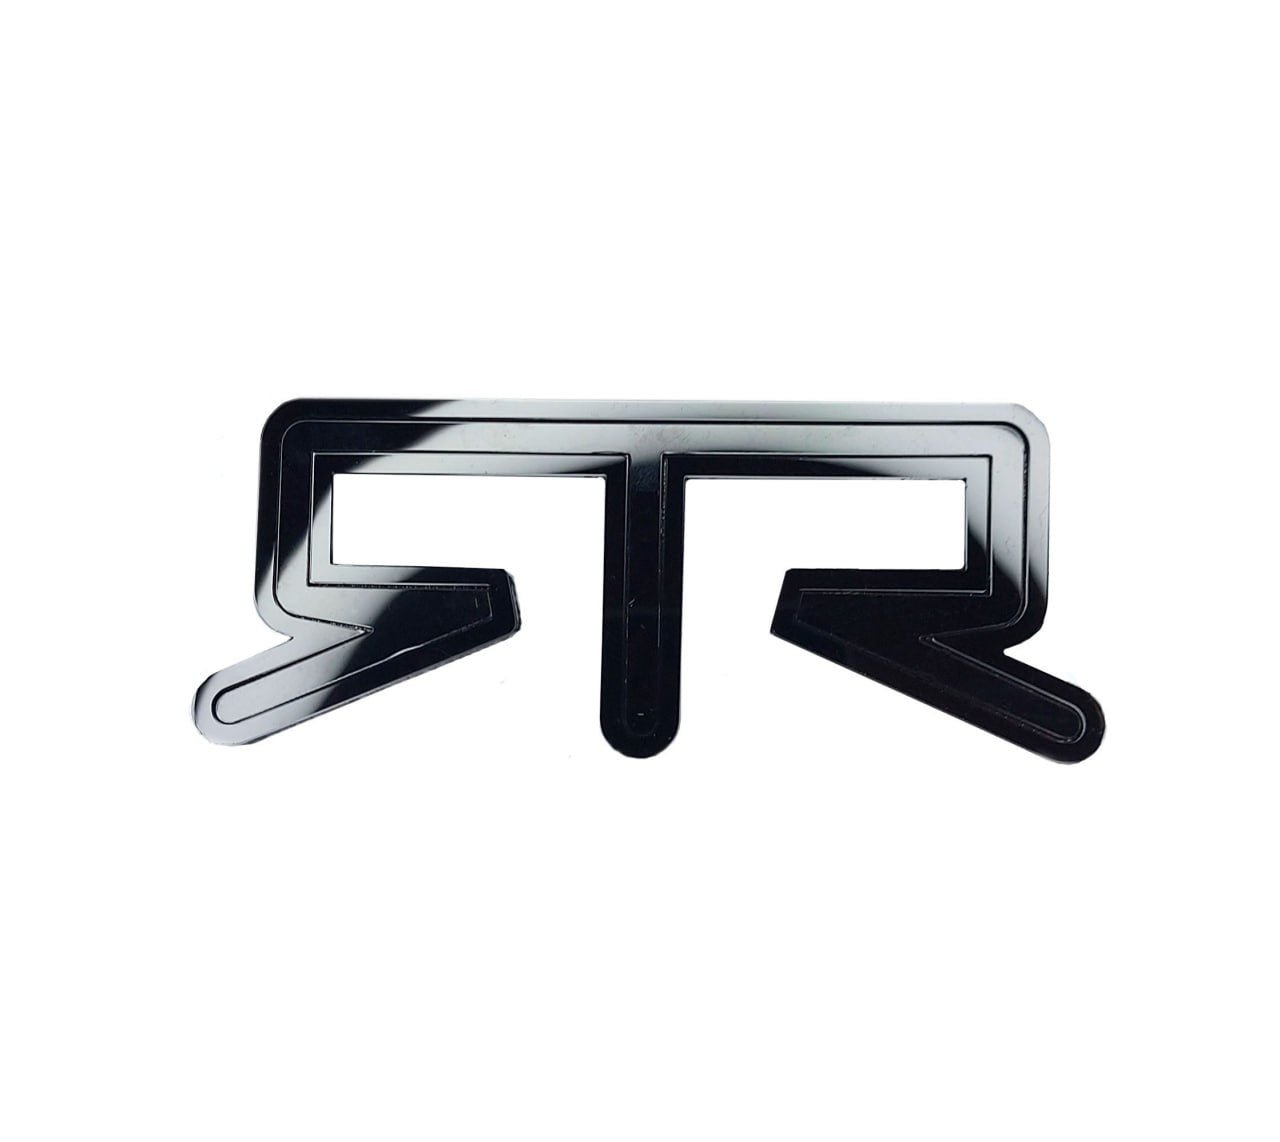 Ford tailgate trunk rear emblem with RTR logo - decoinfabric